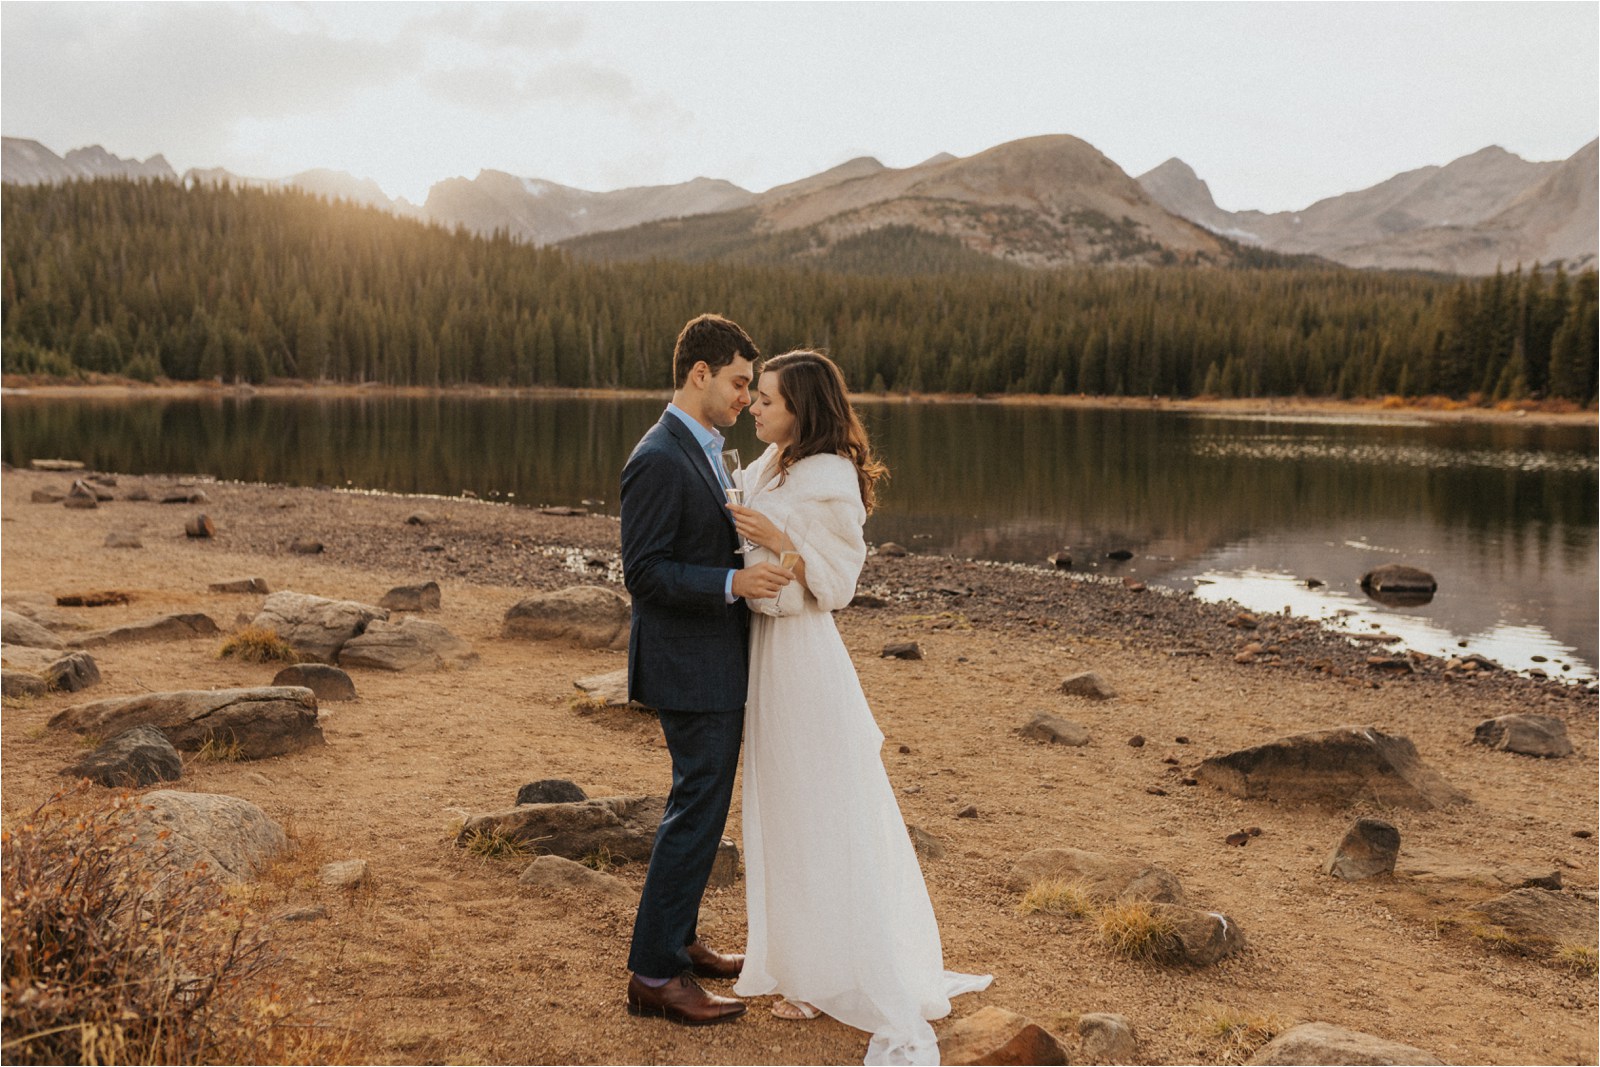 Married couple having their first dance and drinking champagne in front of a lake surrounded by mountains, with the sun setting between the mountain peaks after their elopement in Boulder, Colorado.